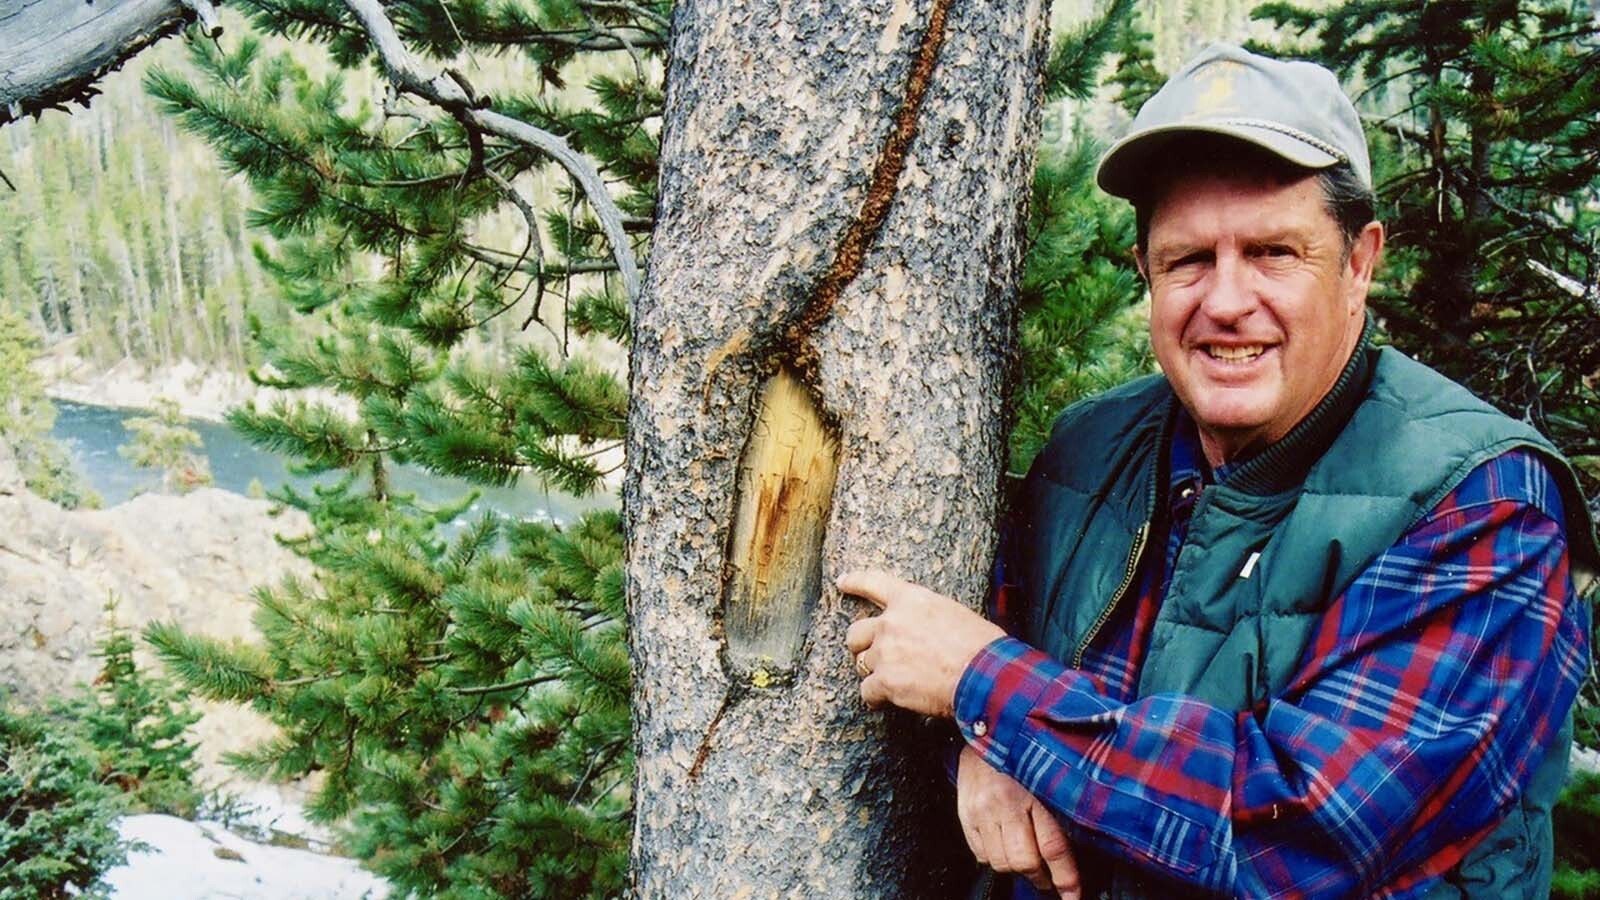 Bob Richard points to the historic tree carving made by Bob Hayden in 1871 in Yellowstone National Park.